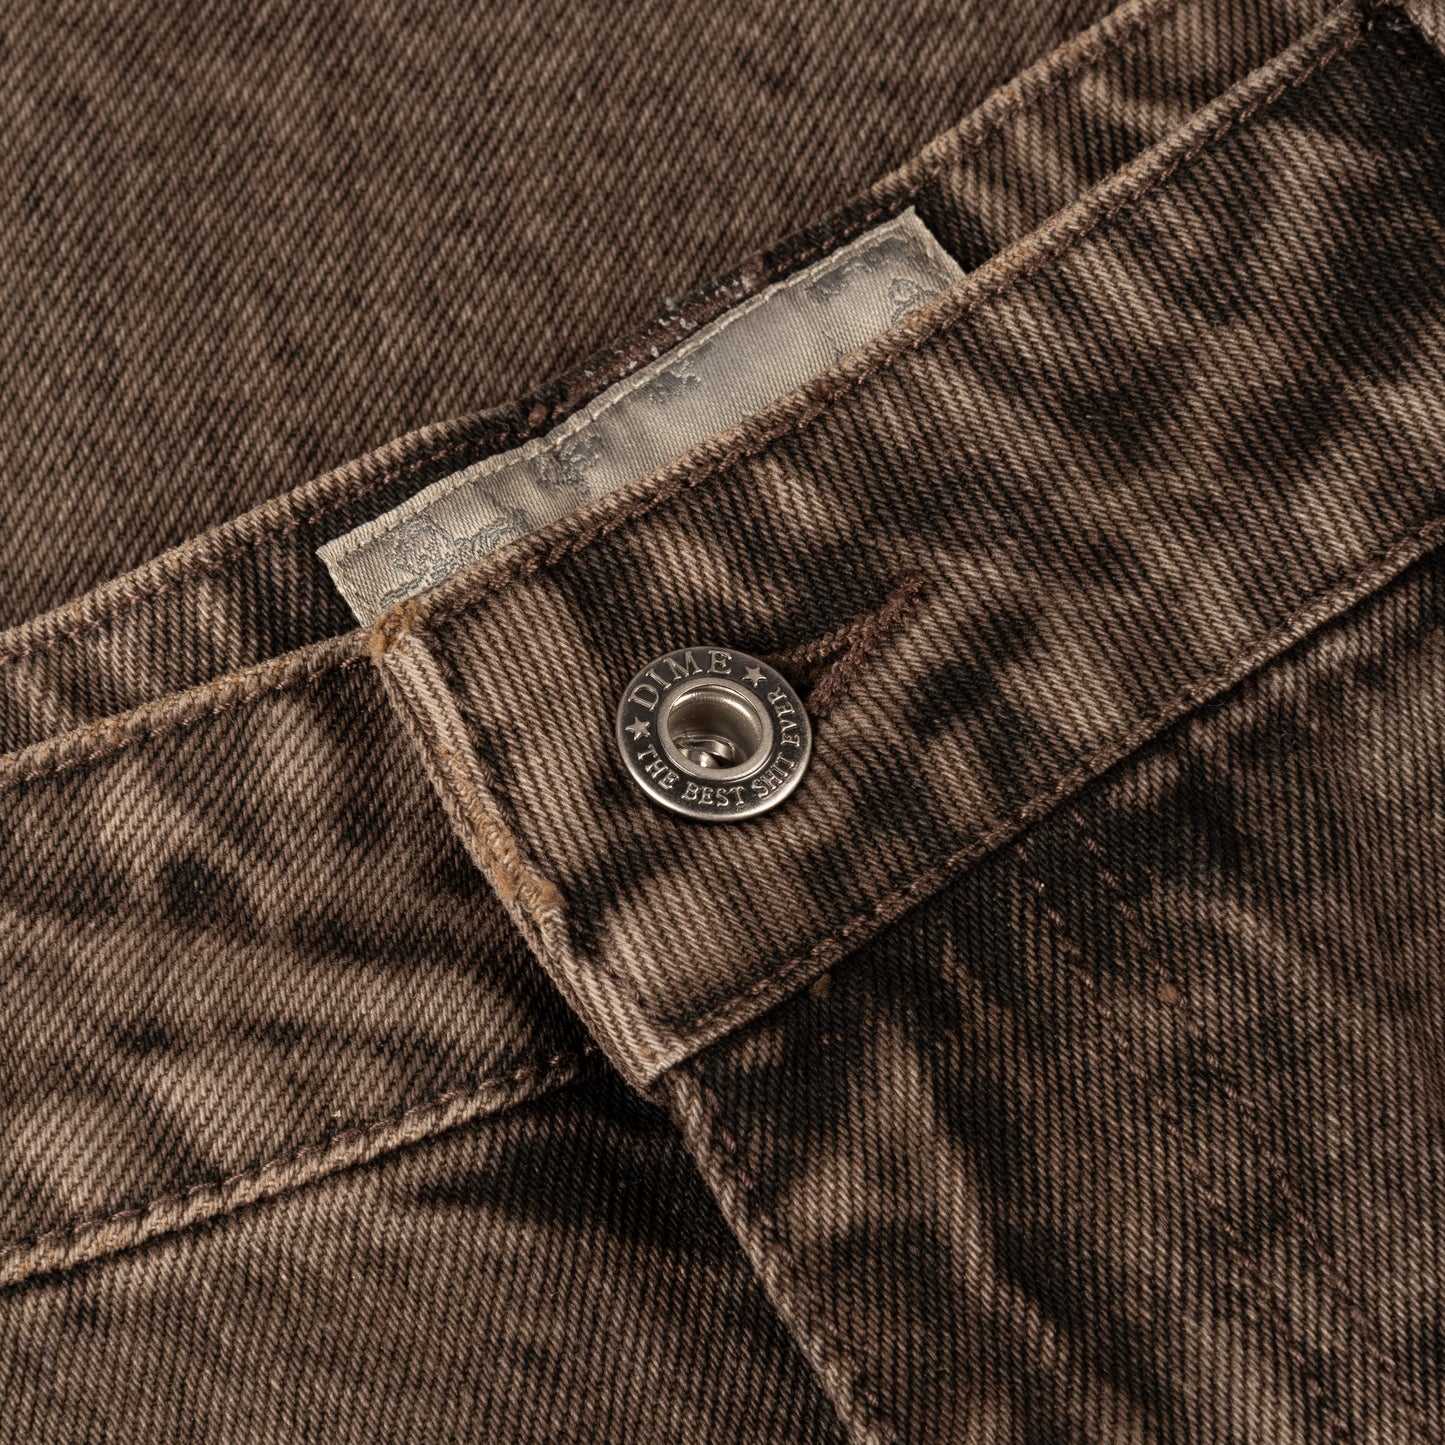 Dime Classic Relaxed Denim Pants - Faded Brown